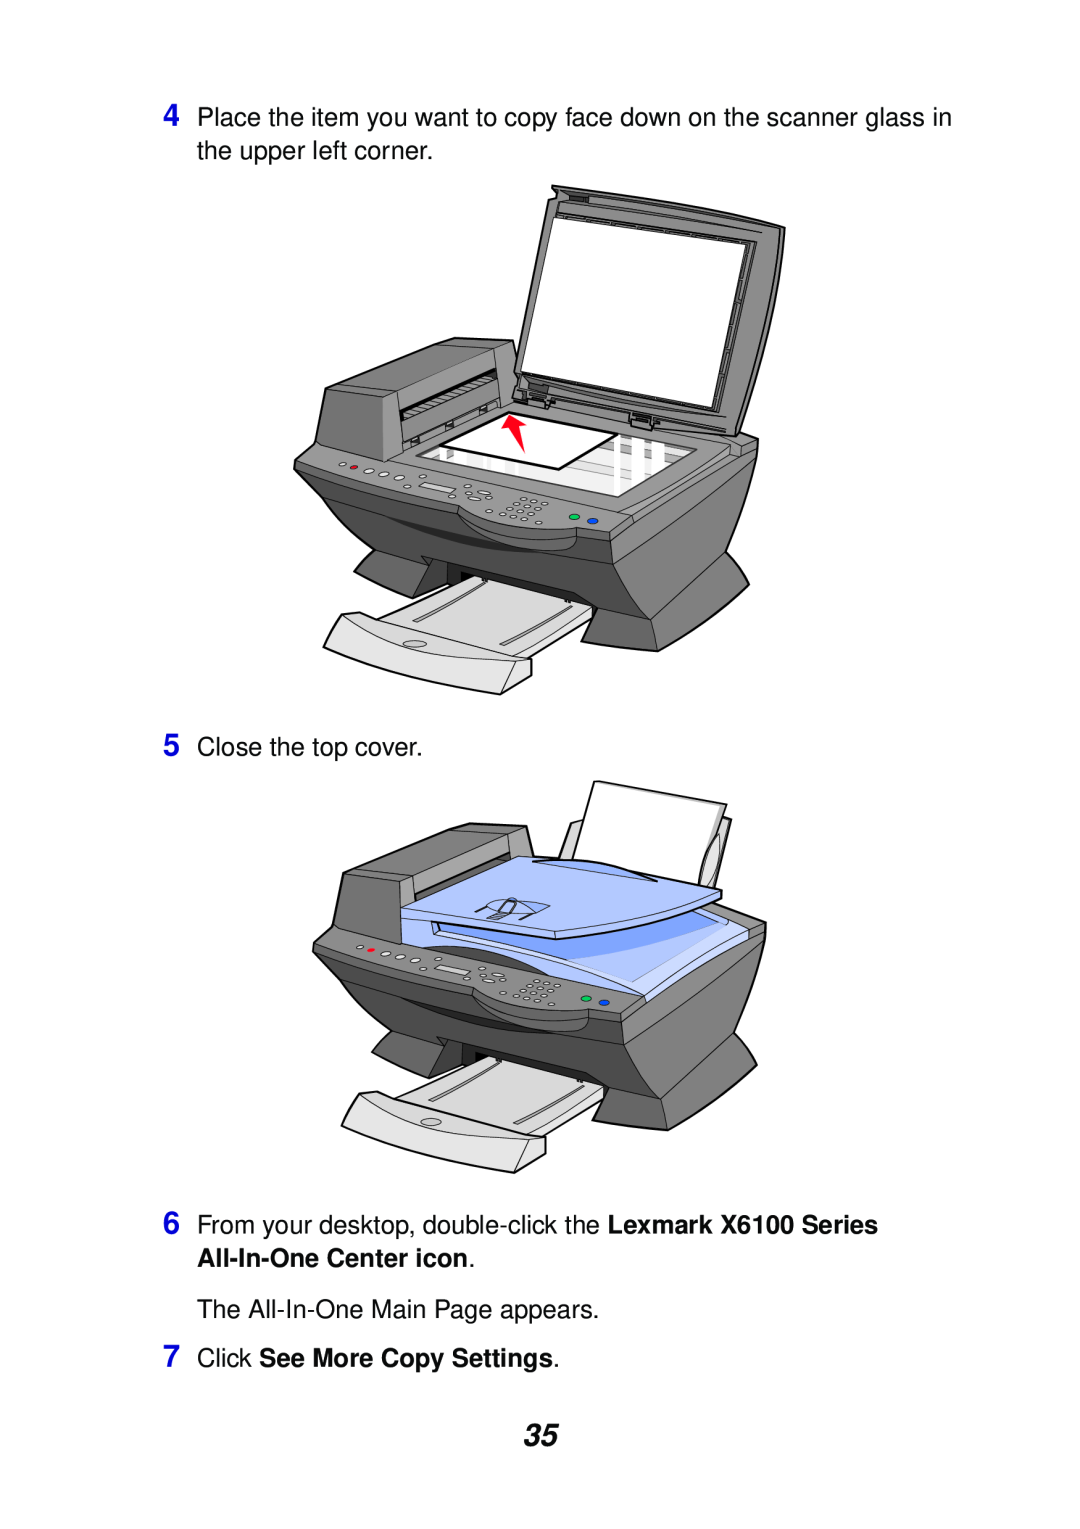 Lexmark X6100 manual 5Close the top cover, The All-In-OneMain Page appears, 7Click See More Copy Settings 